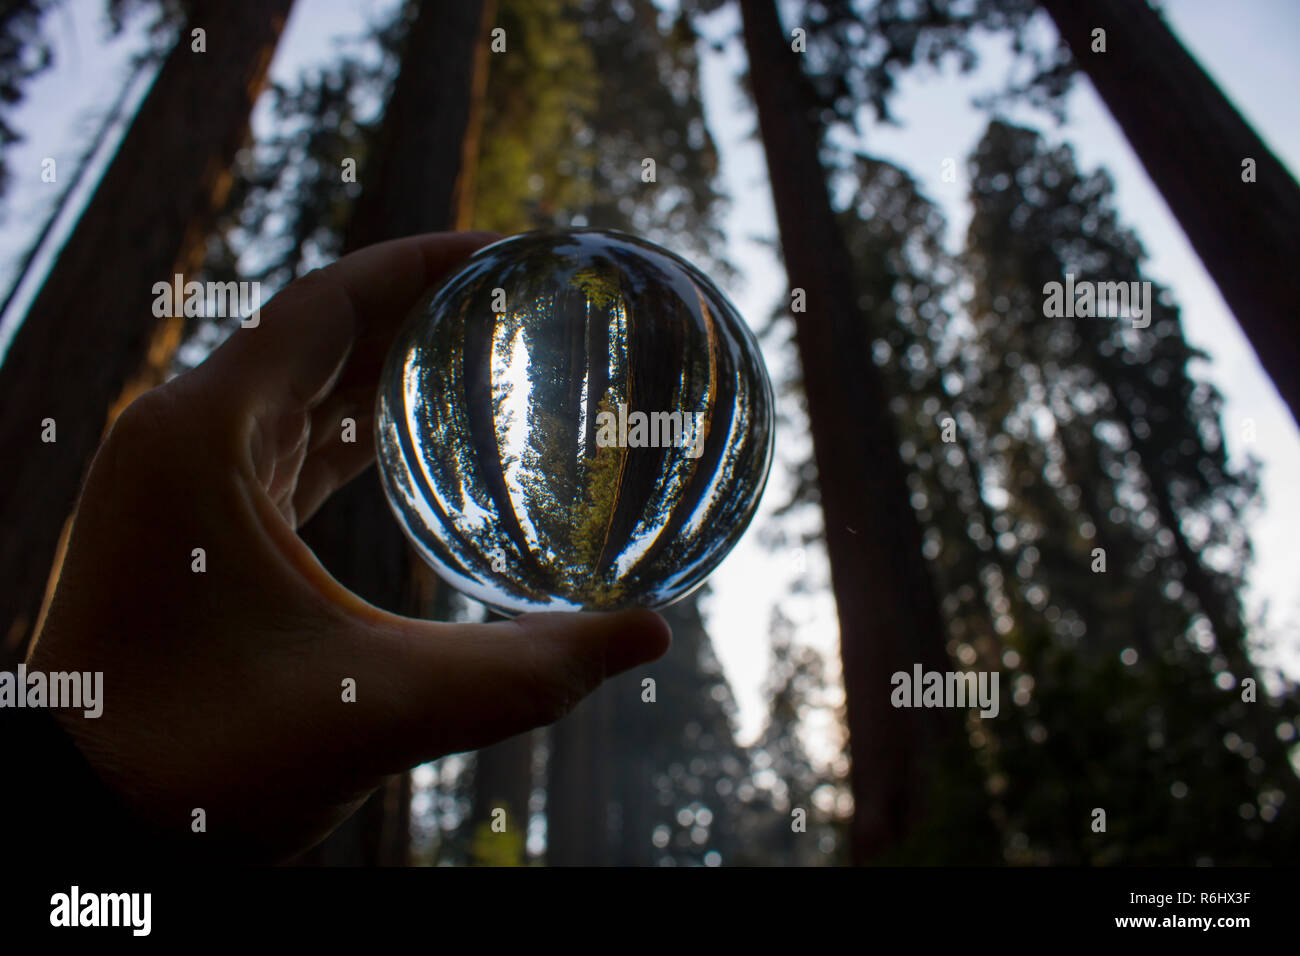 Grove of Giant Sequoia Redwood trees in California forest captured in glass ball reflection held in fingers. Stock Photo